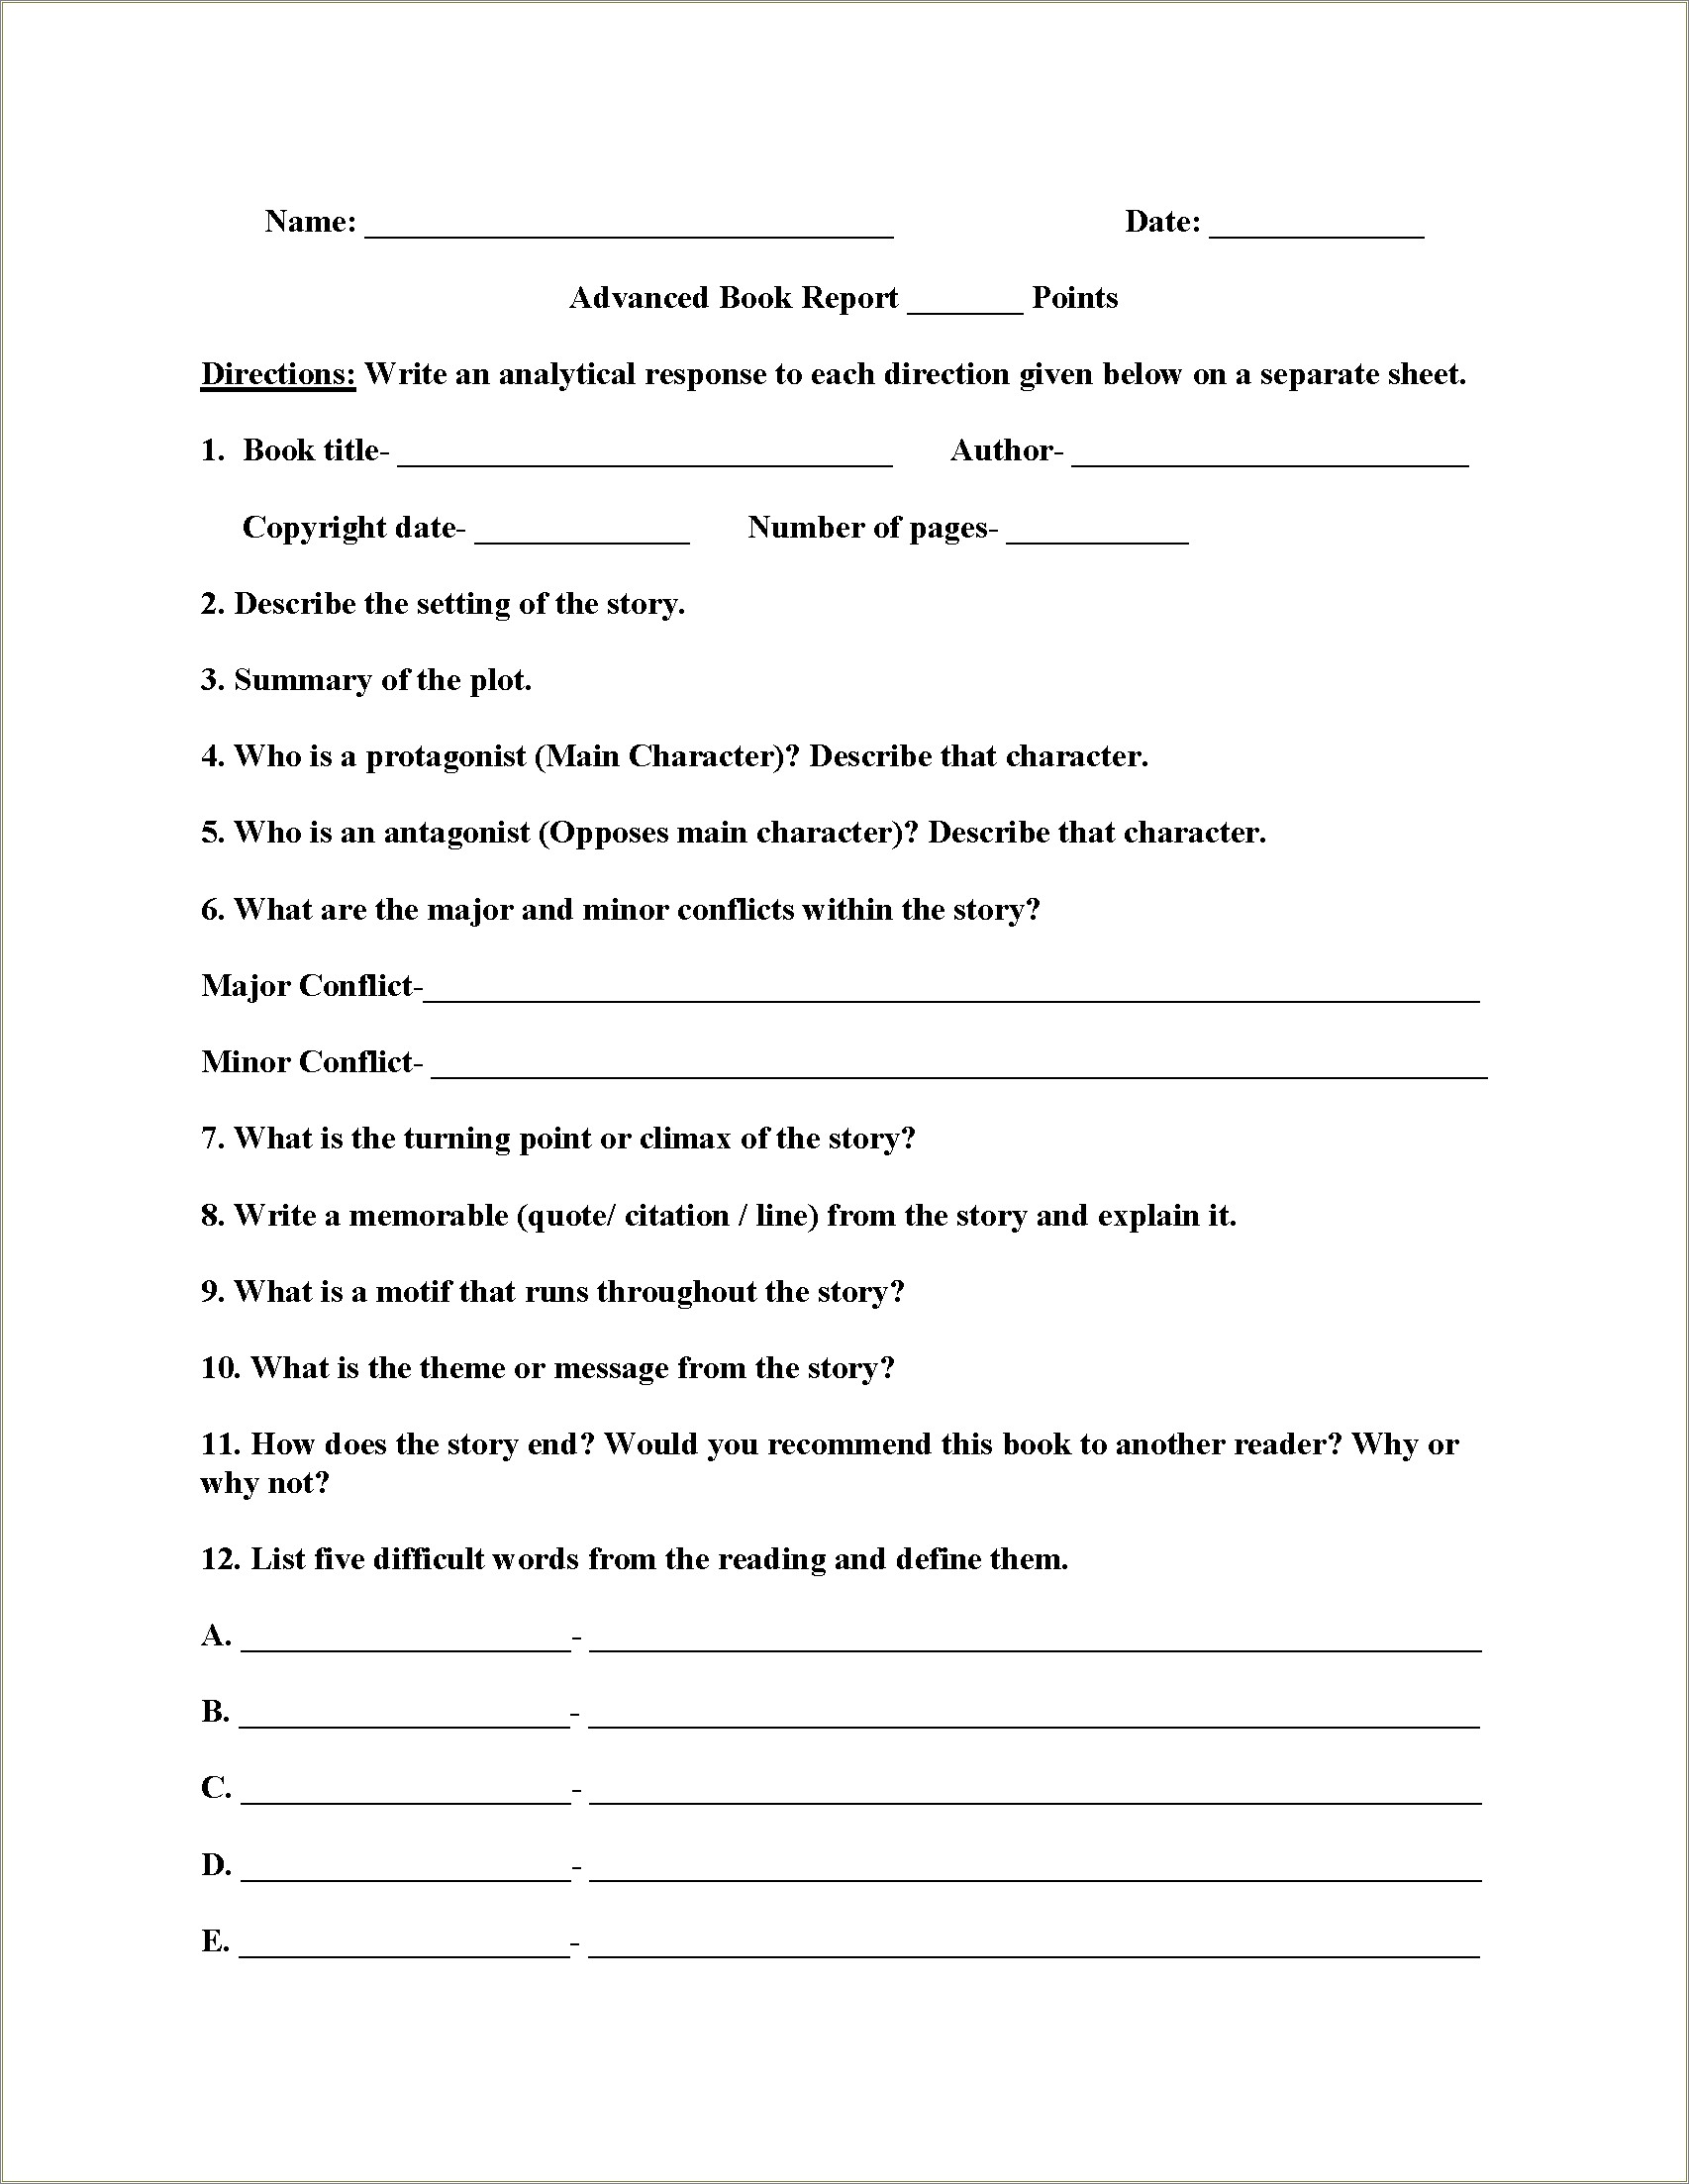 2nd-grade-book-report-template-free-printable-resume-example-gallery